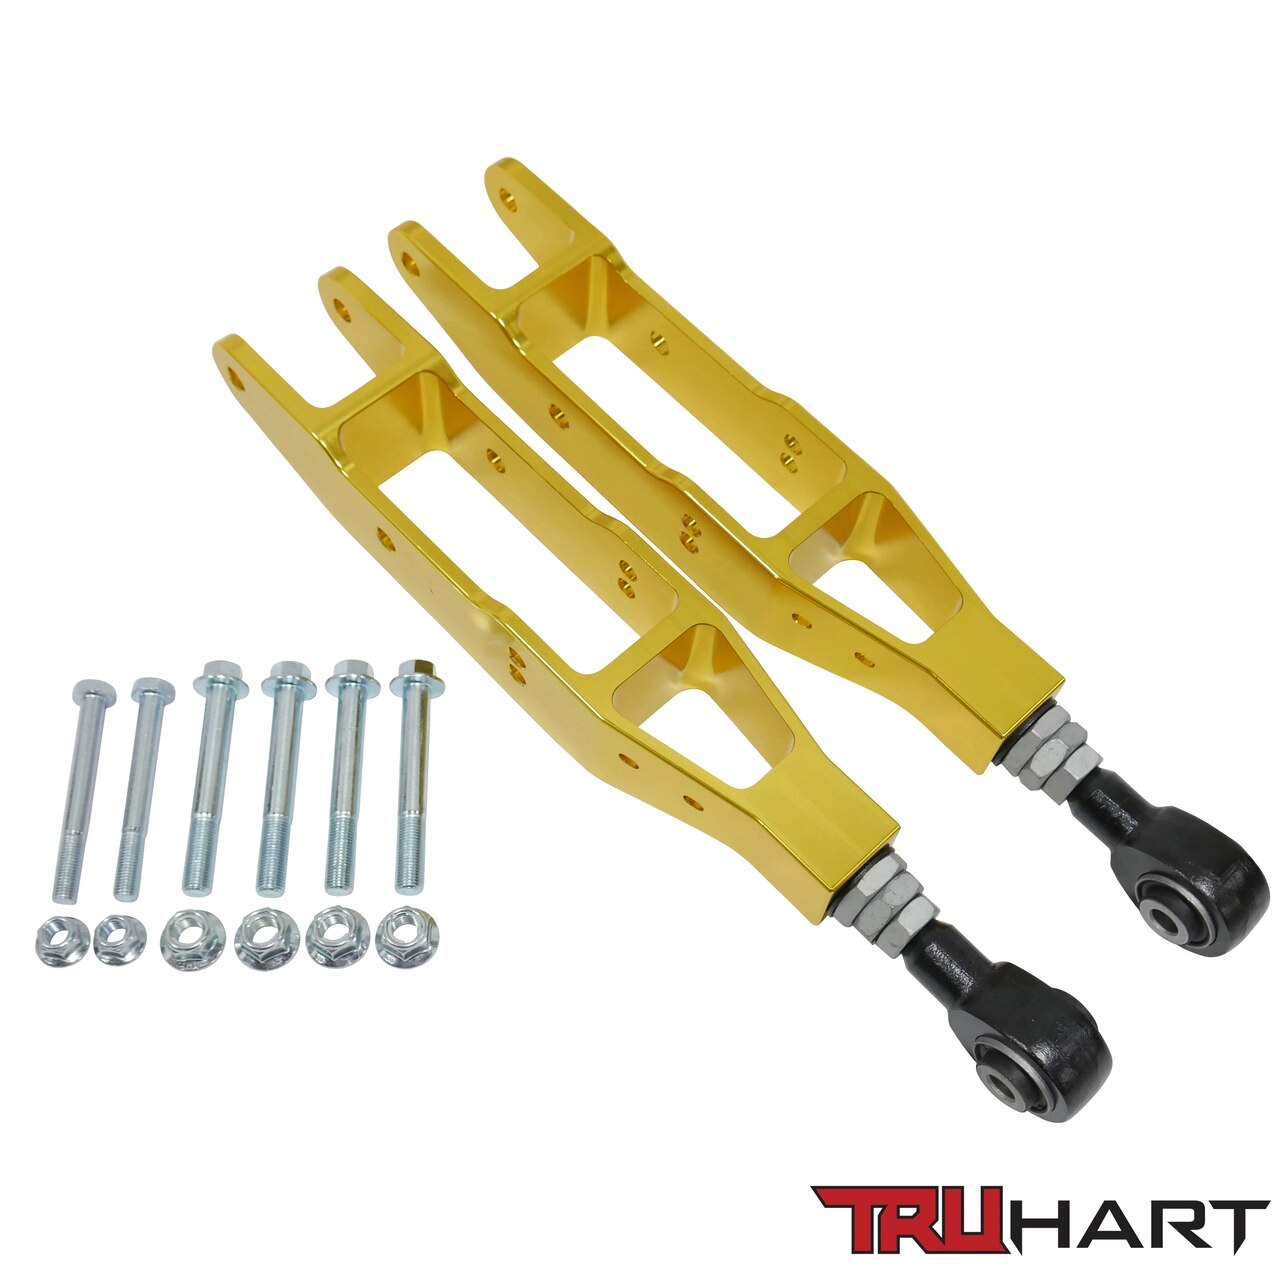 TruHart - Rear Lower Control Arms - Adjustable - Anodized Gold - TH-S108-GO - NextGen Tuning